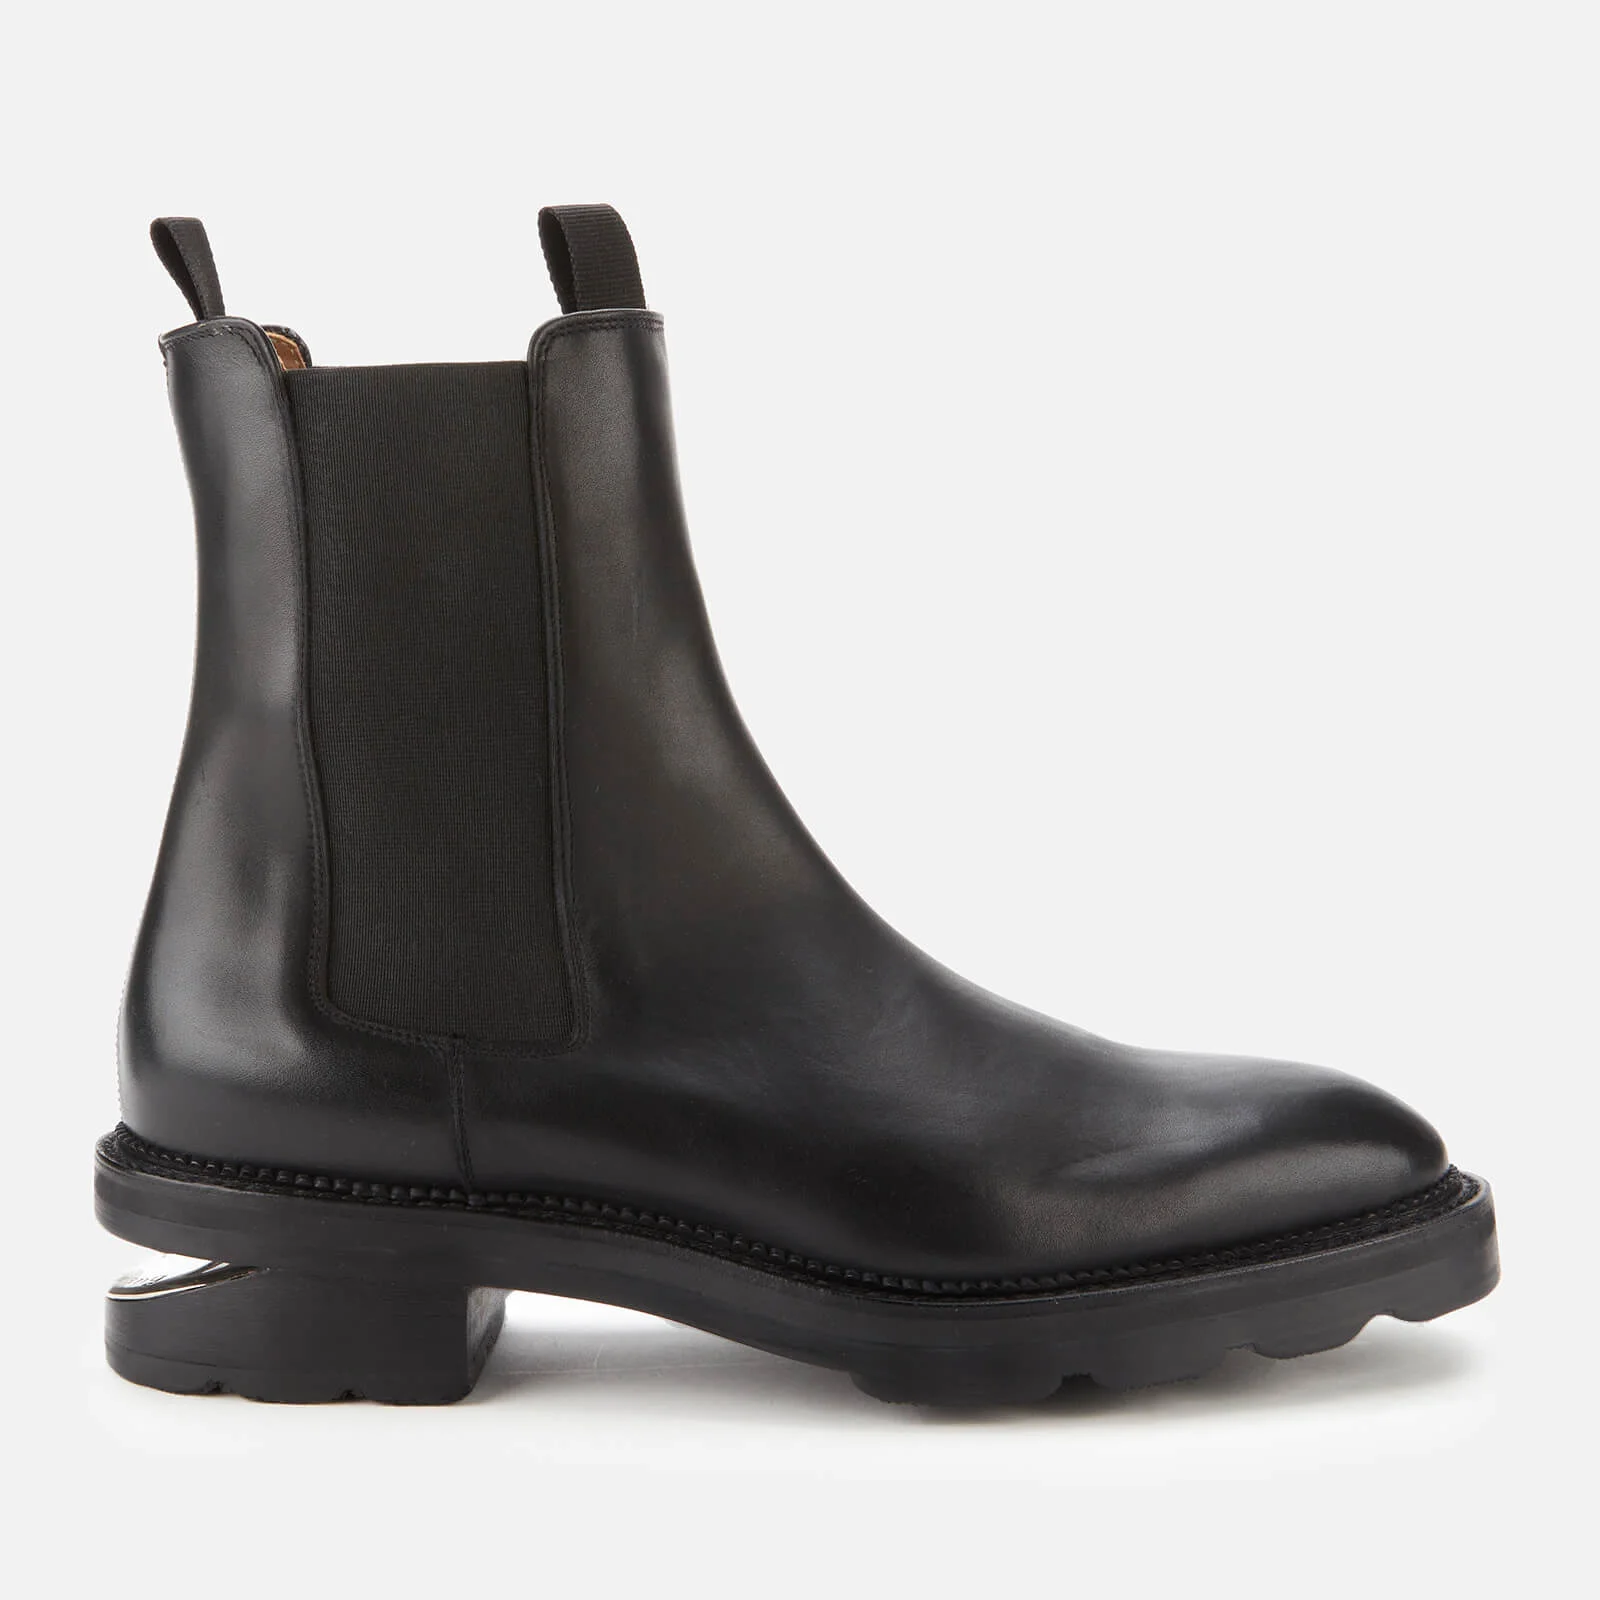 Alexander Wang Women's Andy Leather Chelsea Boots - Black - UK 7 Image 1